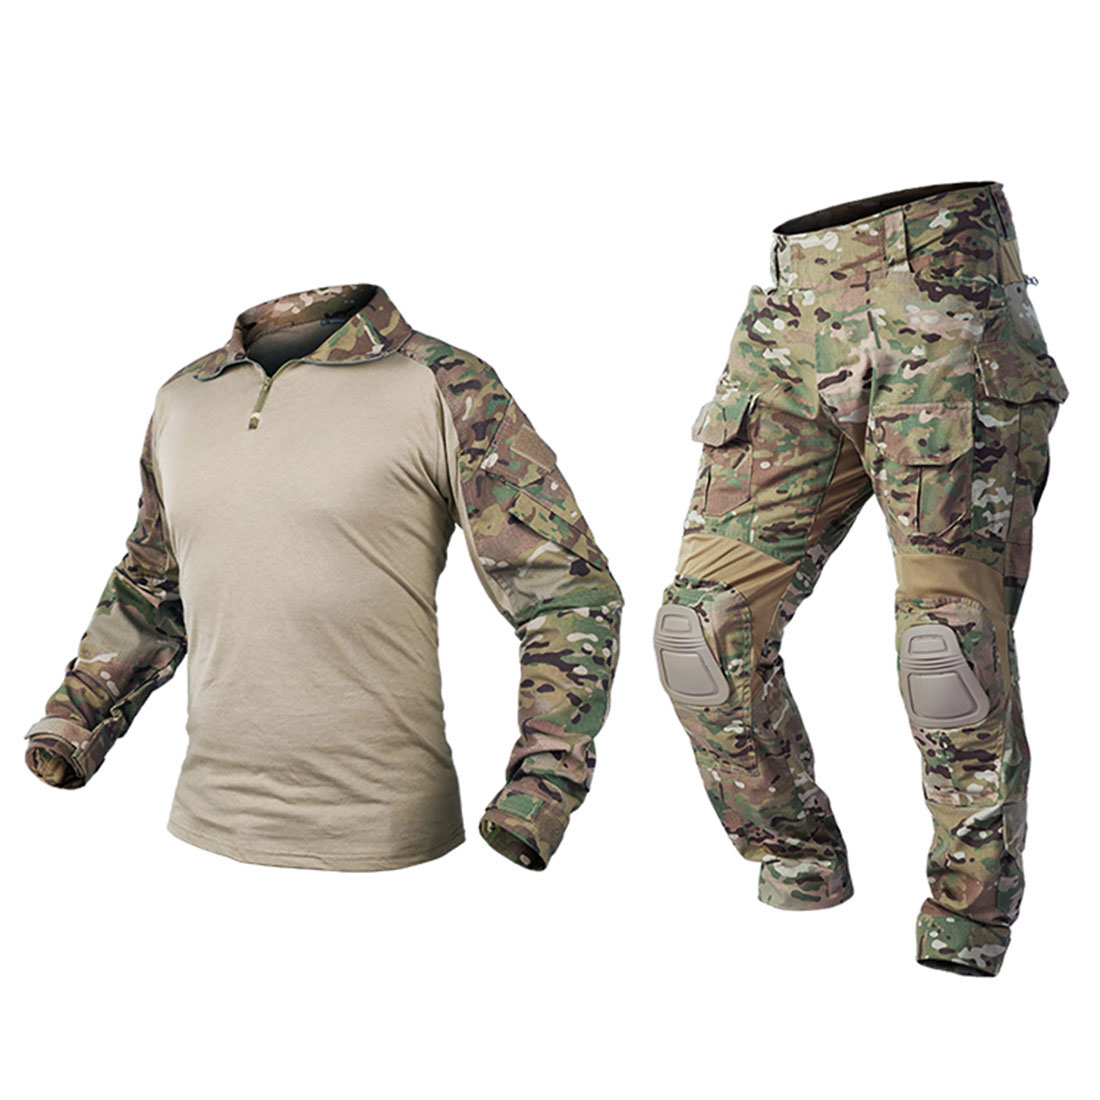 IDOGEAR Tactical G3 Combat Suits With Knee Pads